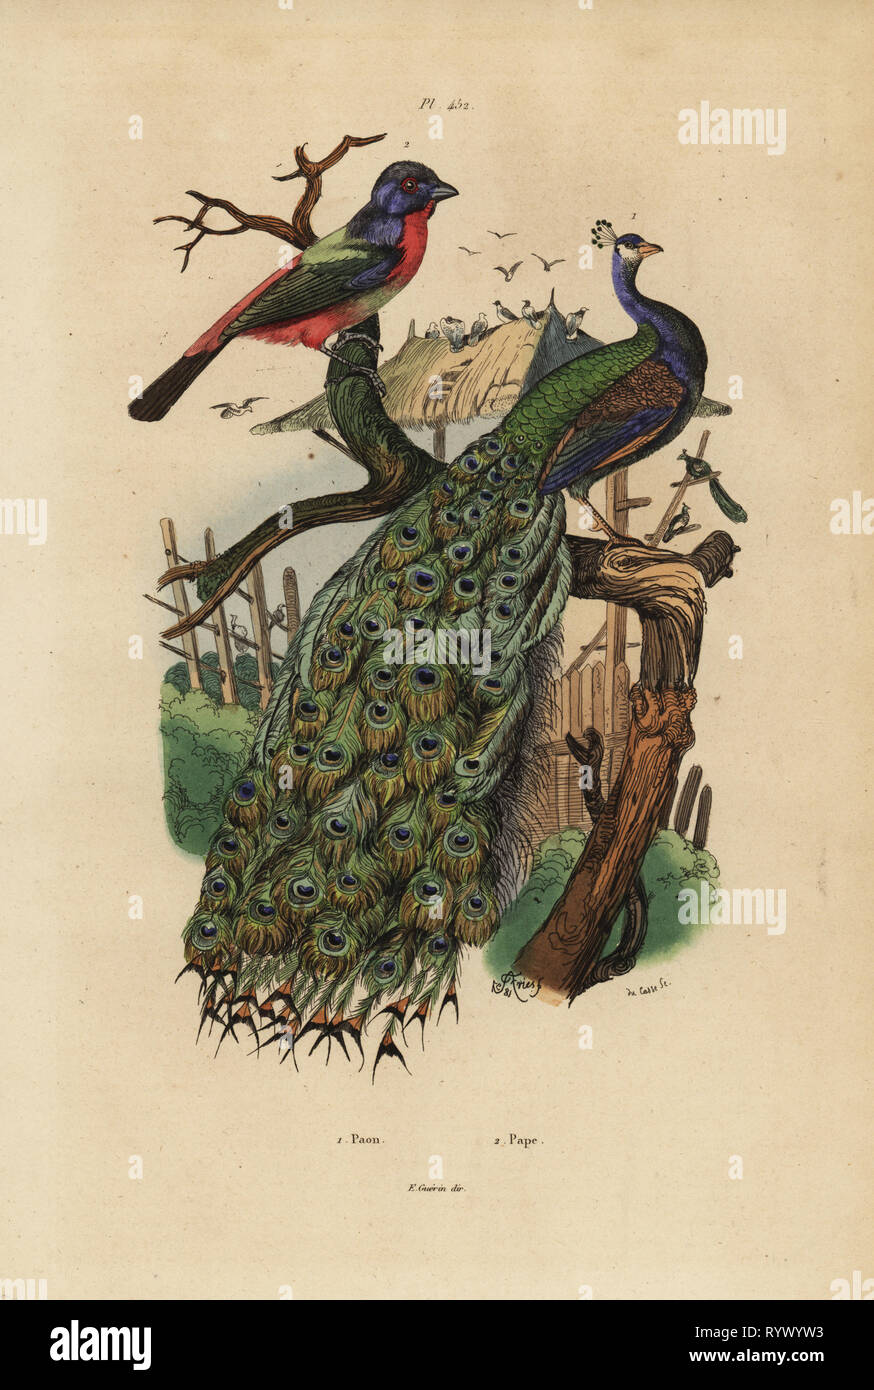 Indian peafowl, Pavo cristatus, and parrotfinch, Erythrura species. Handcoloured steel engraving by du Casse after an illustration by Adolph Fries from Felix-Edouard Guerin-Meneville's Dictionnaire Pittoresque d'Histoire Naturelle (Picturesque Dictionary of Natural History), Paris, 1834-39. Stock Photo